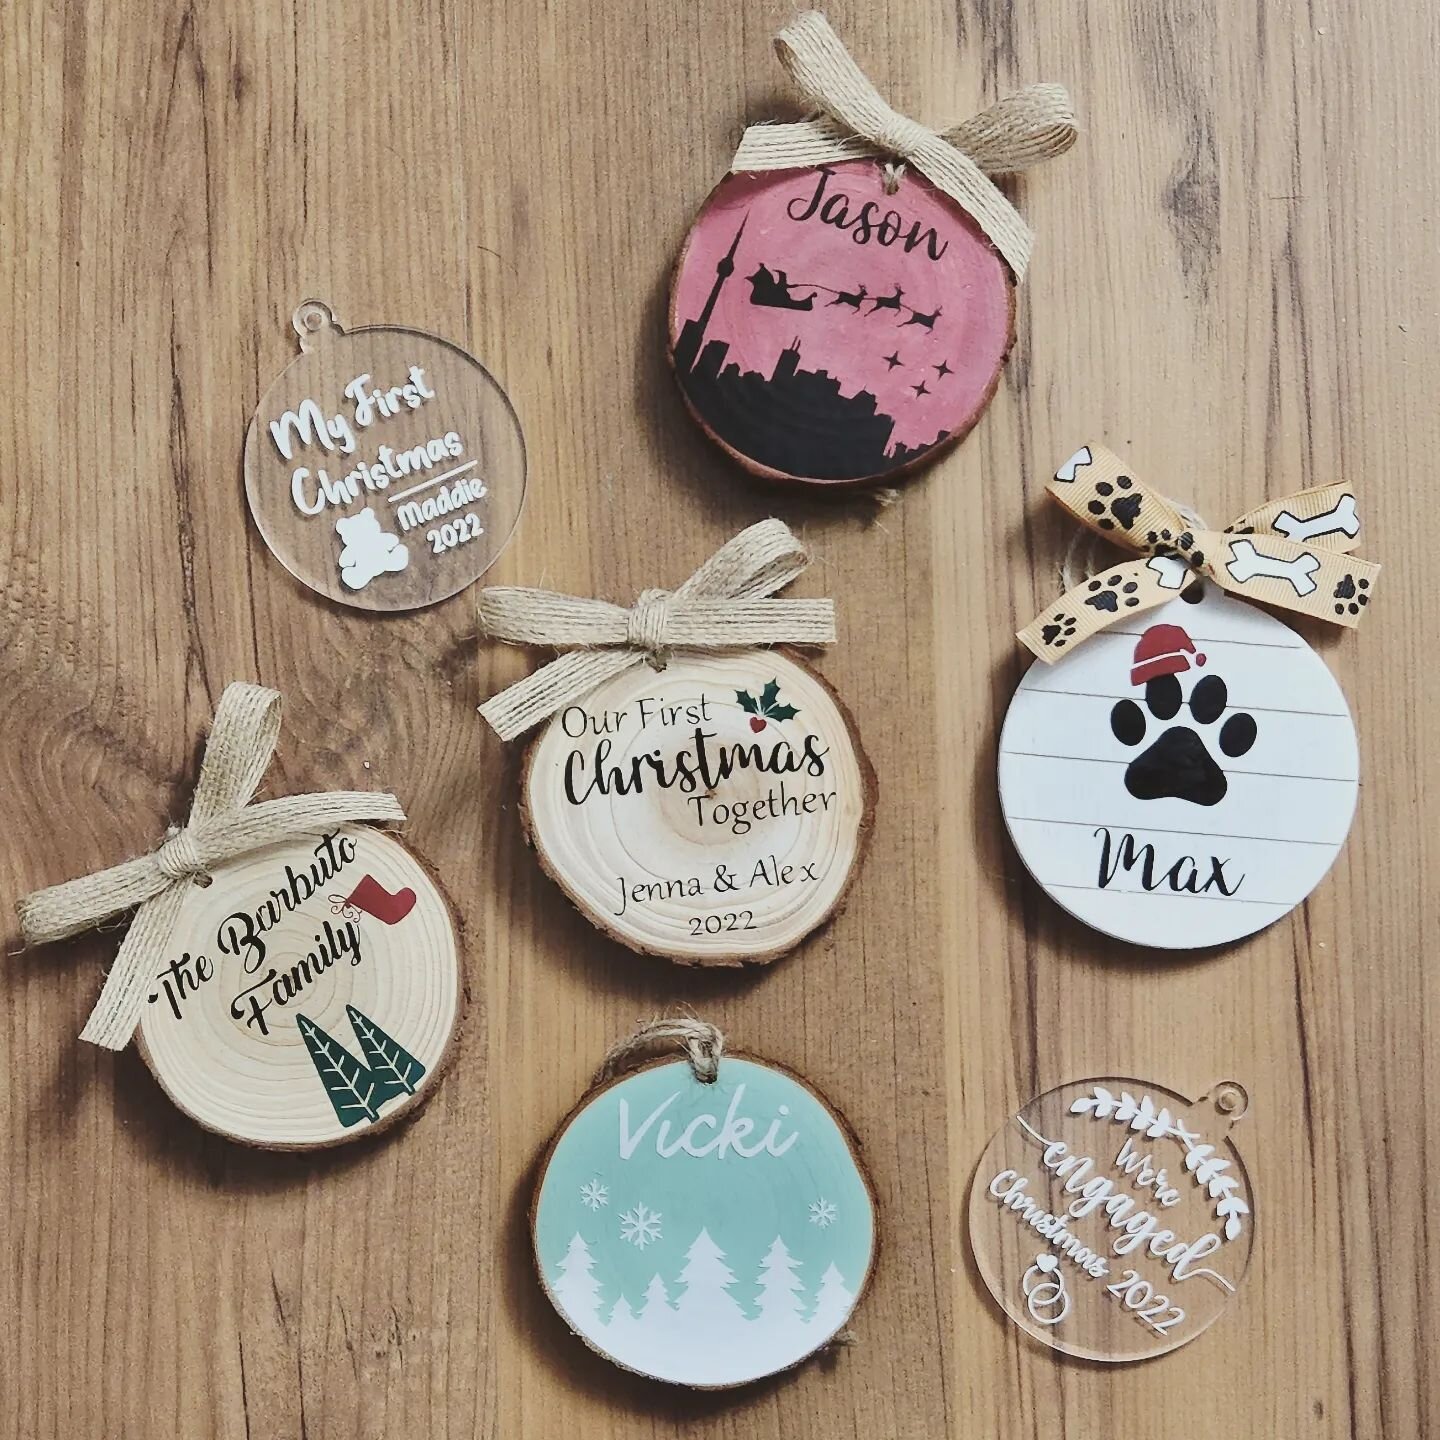 They're here, DM to place your custom orders today! 🎄 3 day turn time for pick-ups/meet-ups and 7 to 10 days if shipping is required
.
Personalizable text with bow:
Acrylic - $14
Wood - $16
Wood Painted- $18
4 of your choice - $50
.
Each design avai